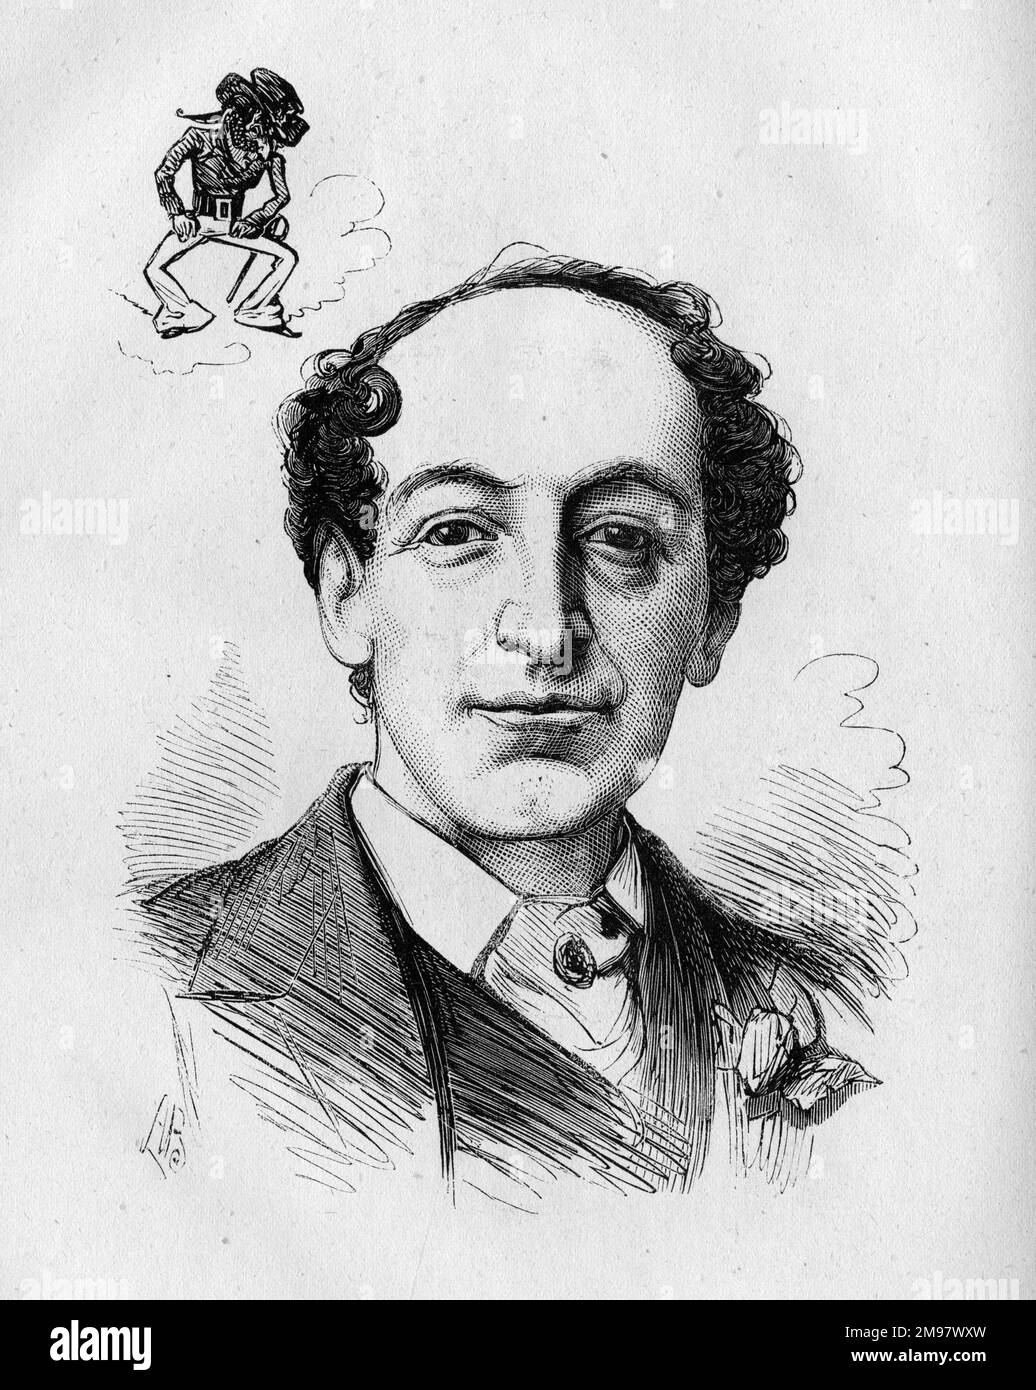 Portrait of James D Stoyle (1831-1880), English character actor and comedian, who had recently appeared in the role of Ben Barnacle (depicted in the top left corner) in a production of Billee Taylor by Stephens and Solomon at the Imperial Theatre, London. The song he sang, All on Account of Eliza, was whistled all over London. Stock Photo